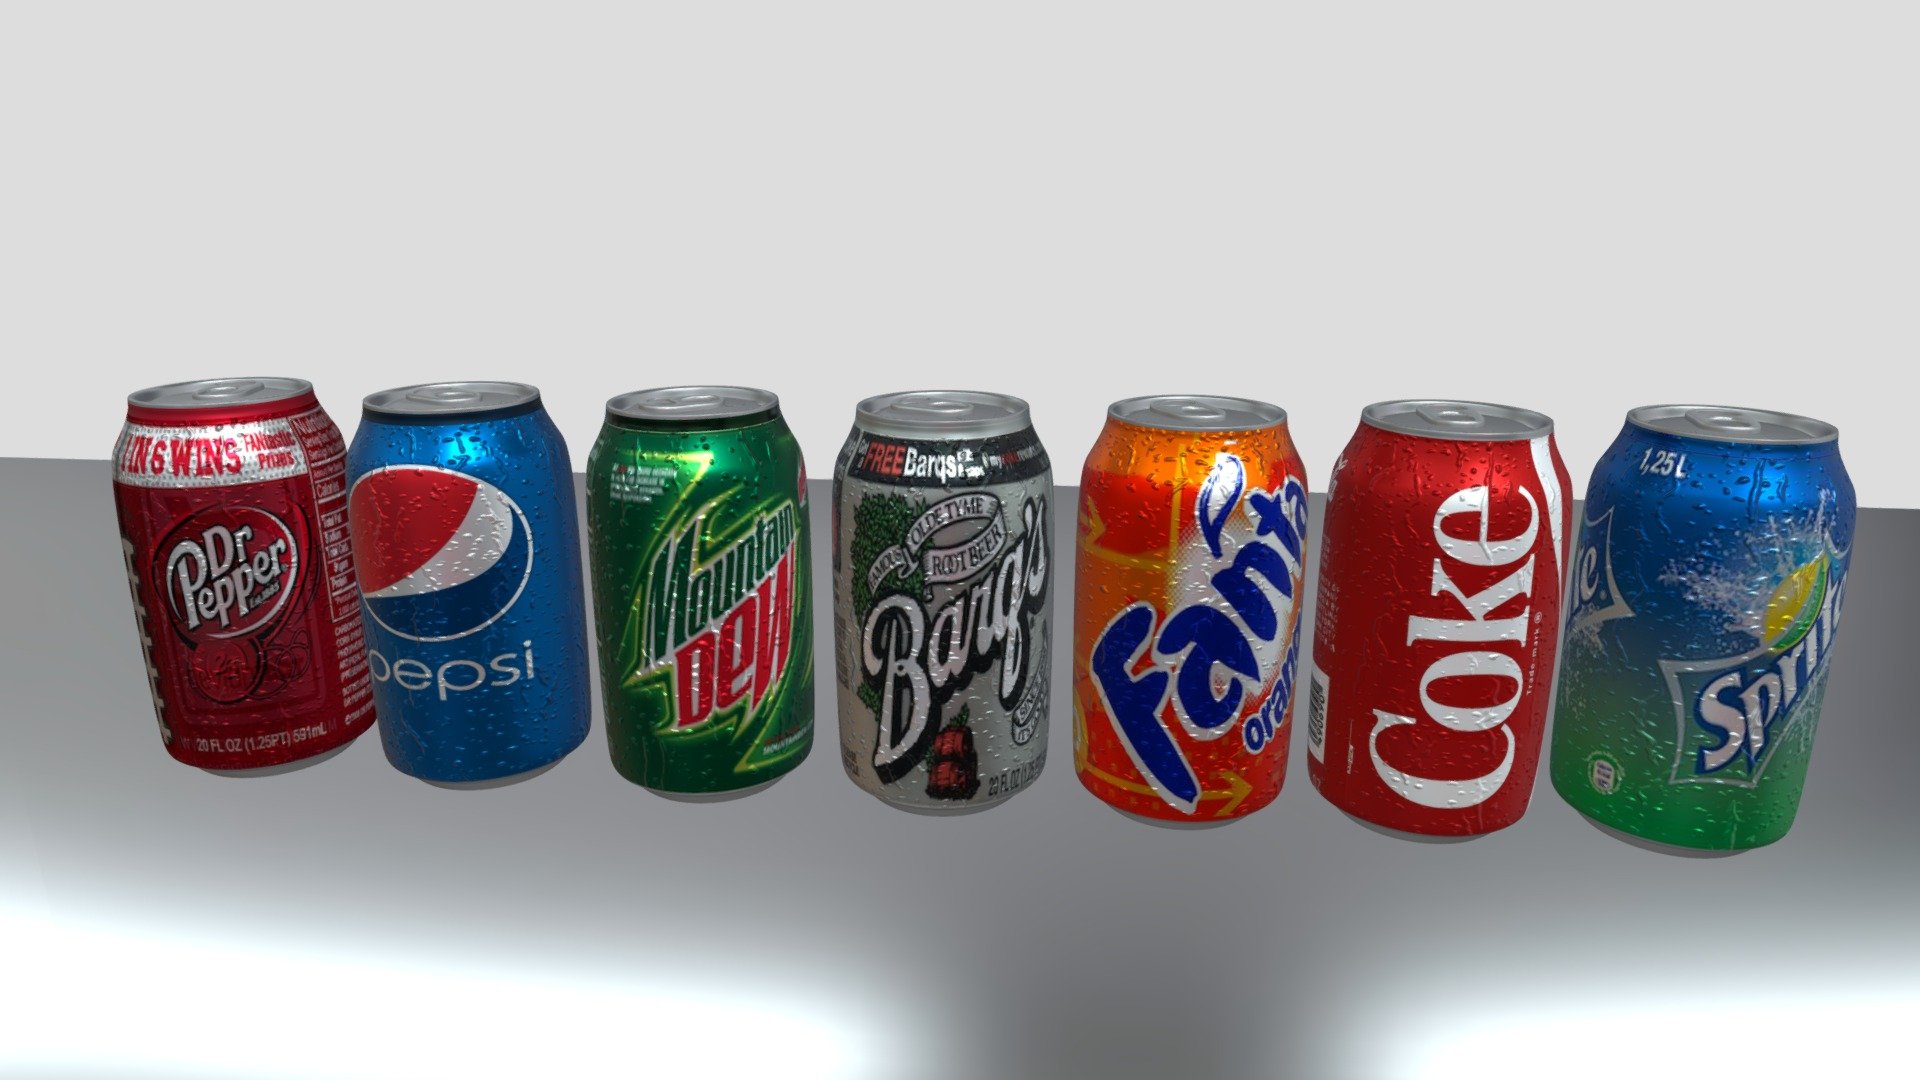 Full soda pop can pack including Dr. Pepper, Sprite, Coke (Coca-Cola), Pepsi, Fanta, Barq’s, and Mountain Dew (Mtn Dew) - Set of 7 soda pop cans including Coke - 3D model by PercyNightshade 3d model